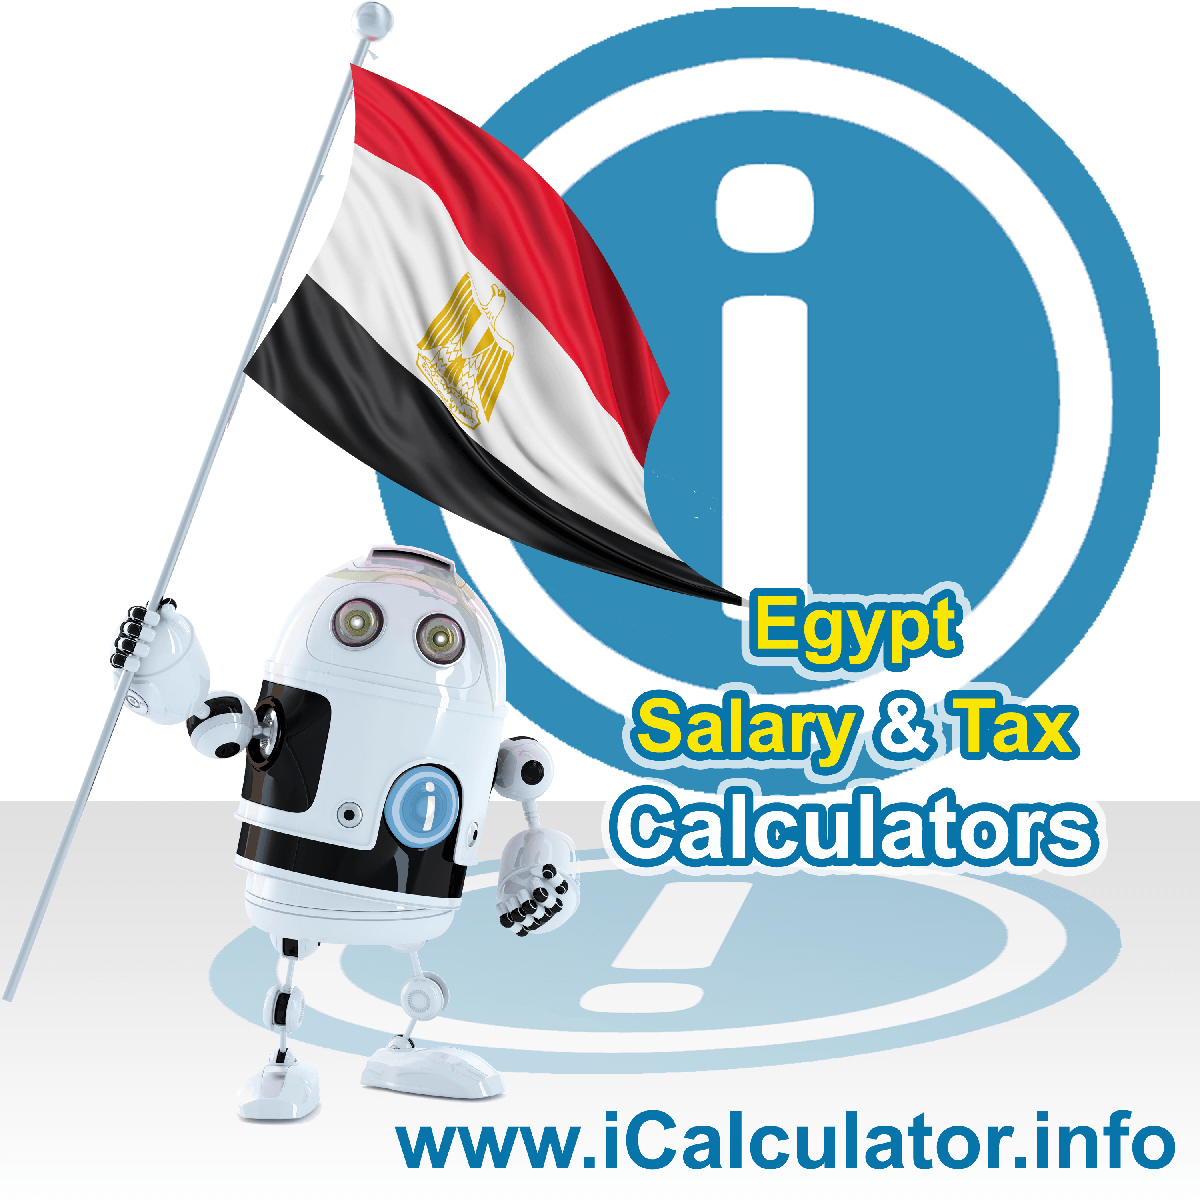 Egypt Salary Calculator. This image shows the Egyptese flag and information relating to the tax formula for the Egypt Tax Calculator